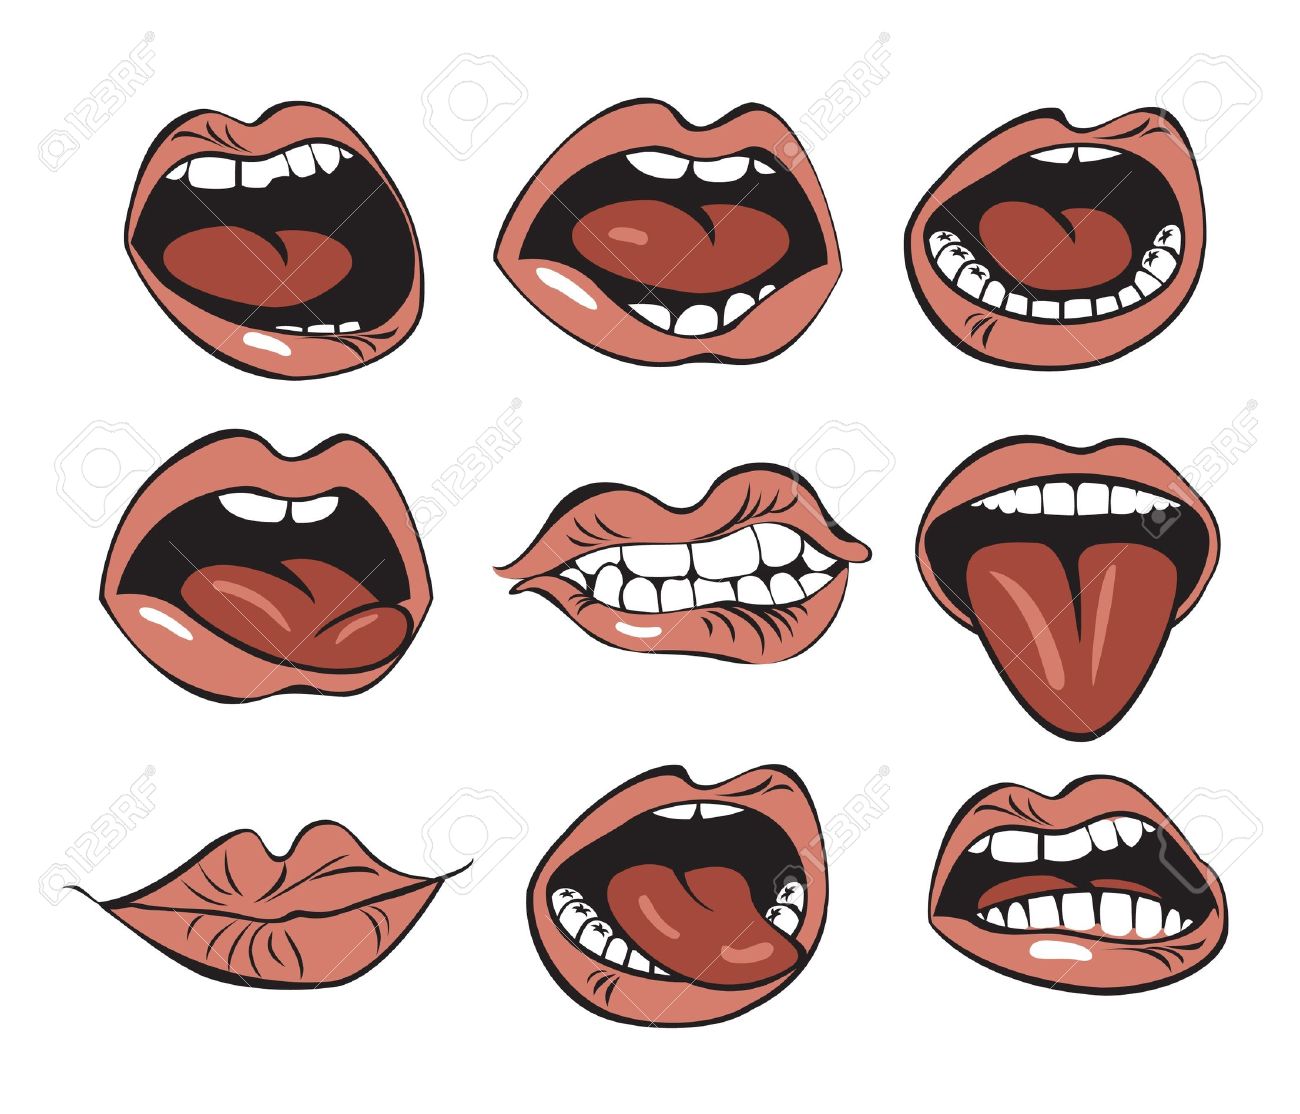 funny mouths clipart - photo #1